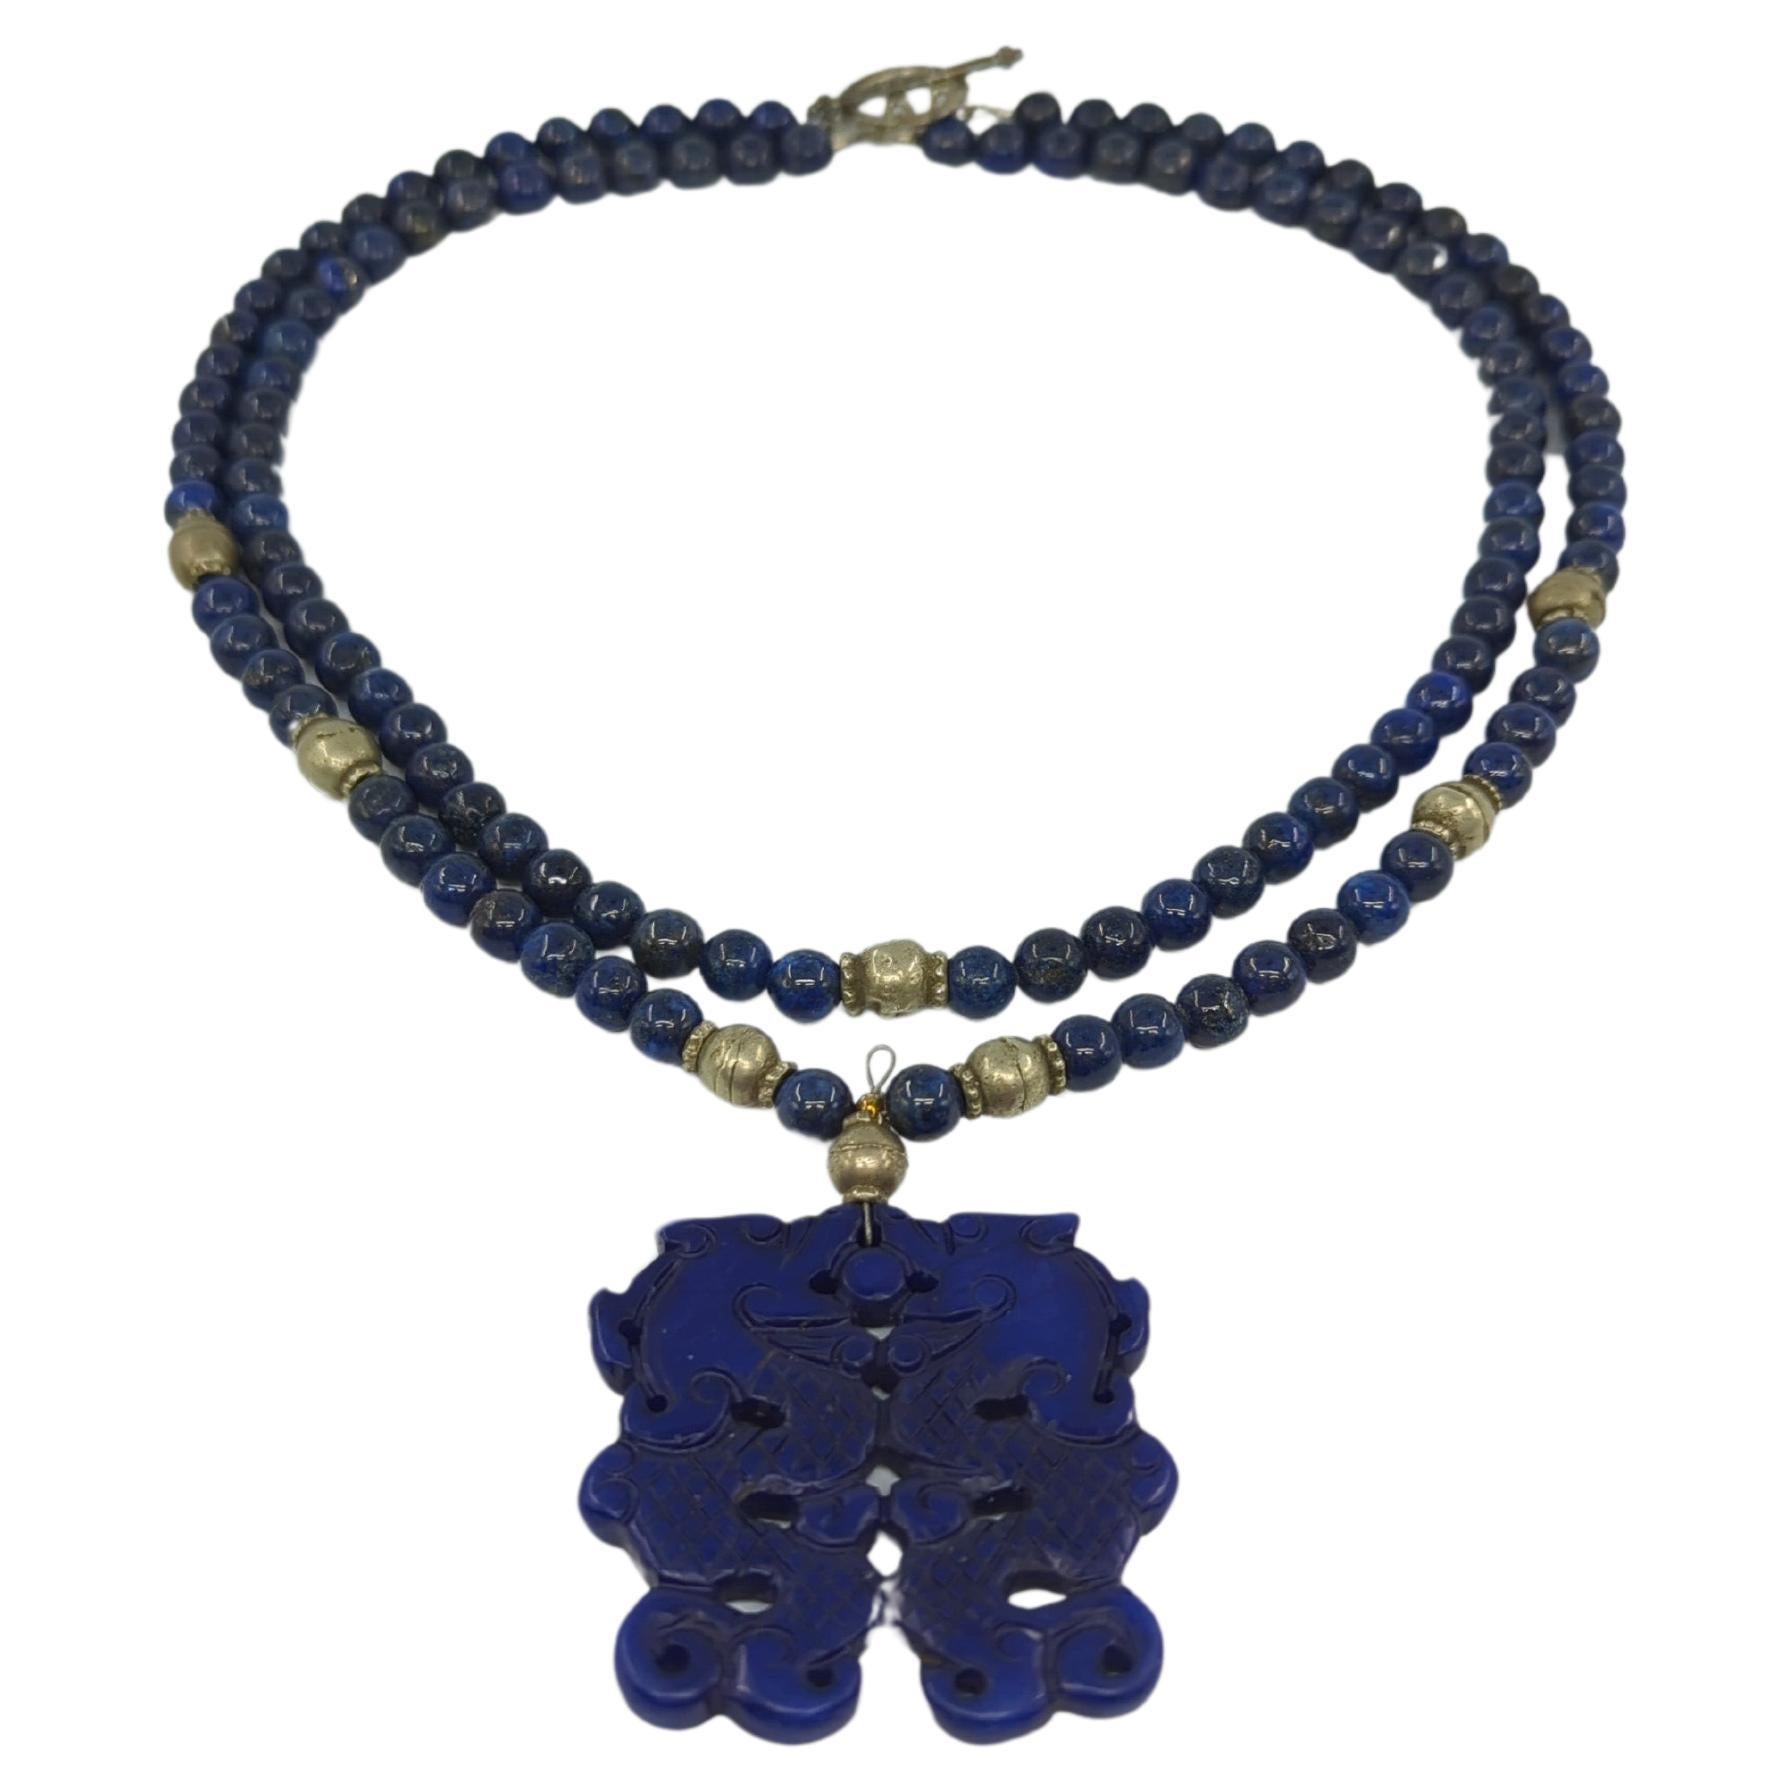 This vintage beaded Lapis necklace is a striking piece of jewelry that exudes both elegance and versatility. Measuring a generous 42 inches in total length, the necklace offers multi-wear options, allowing it to be worn either as a single loop or